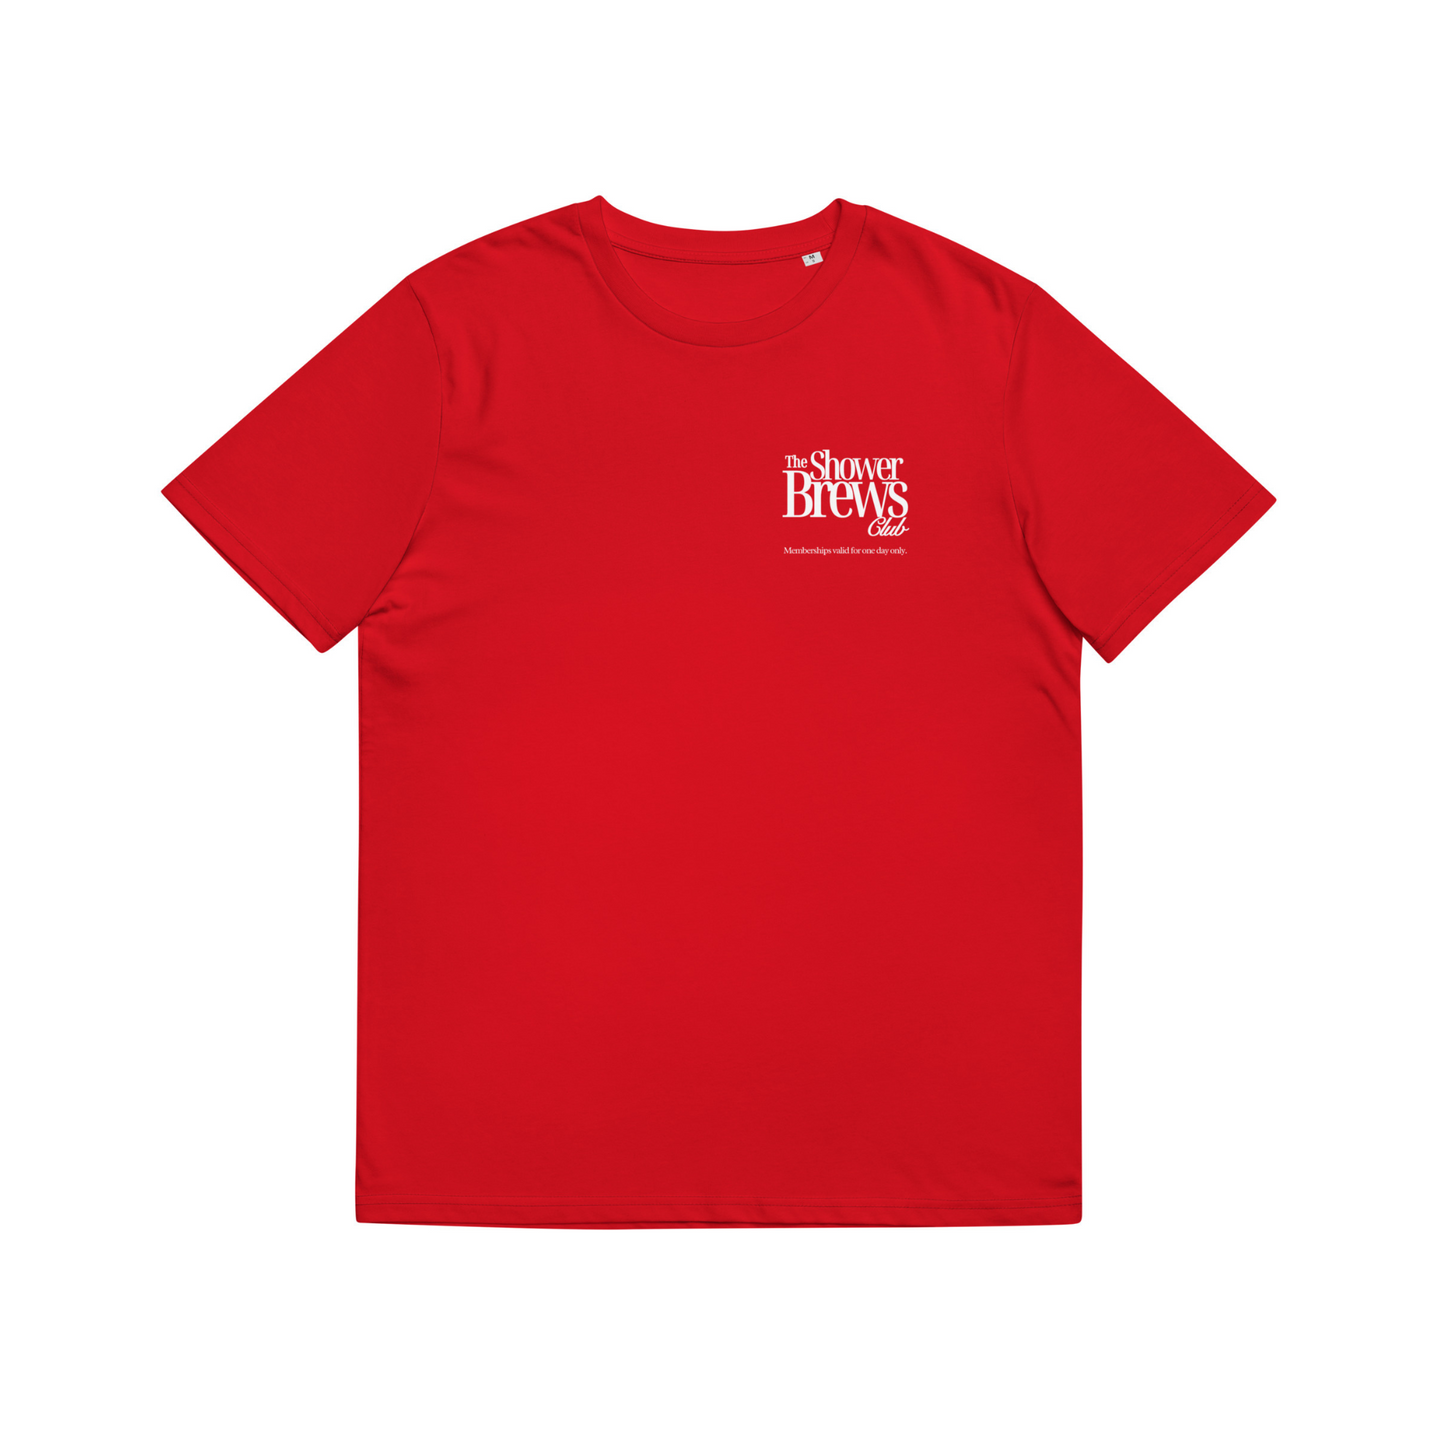 The 'Shower Brews Club' T-Shirt in Red & White